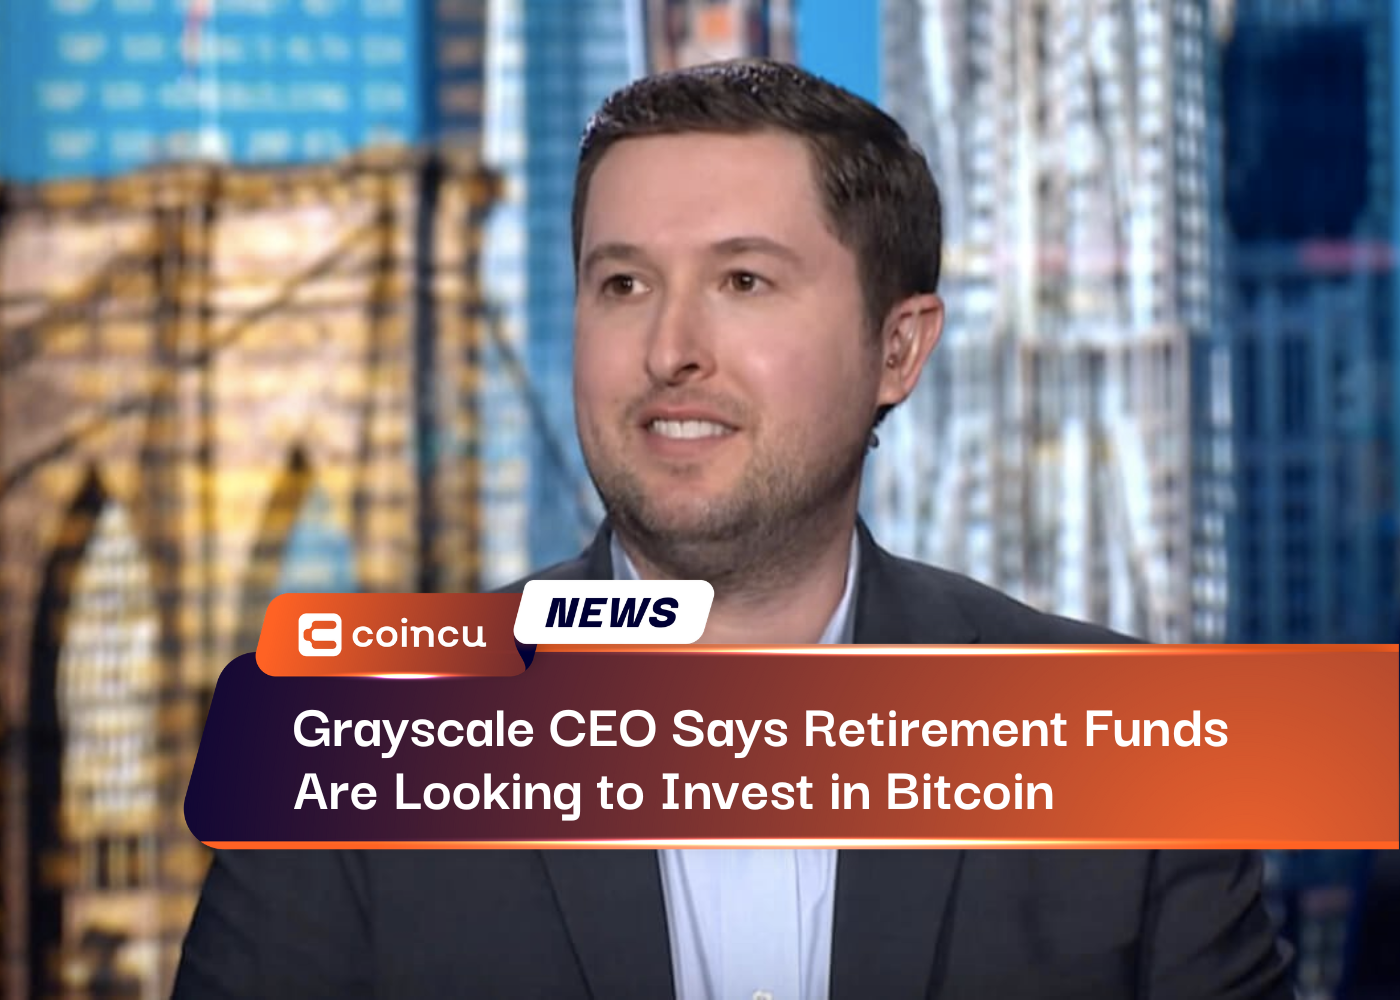 Grayscale CEO Says Retirement Funds Are Looking to Invest in Bitcoin